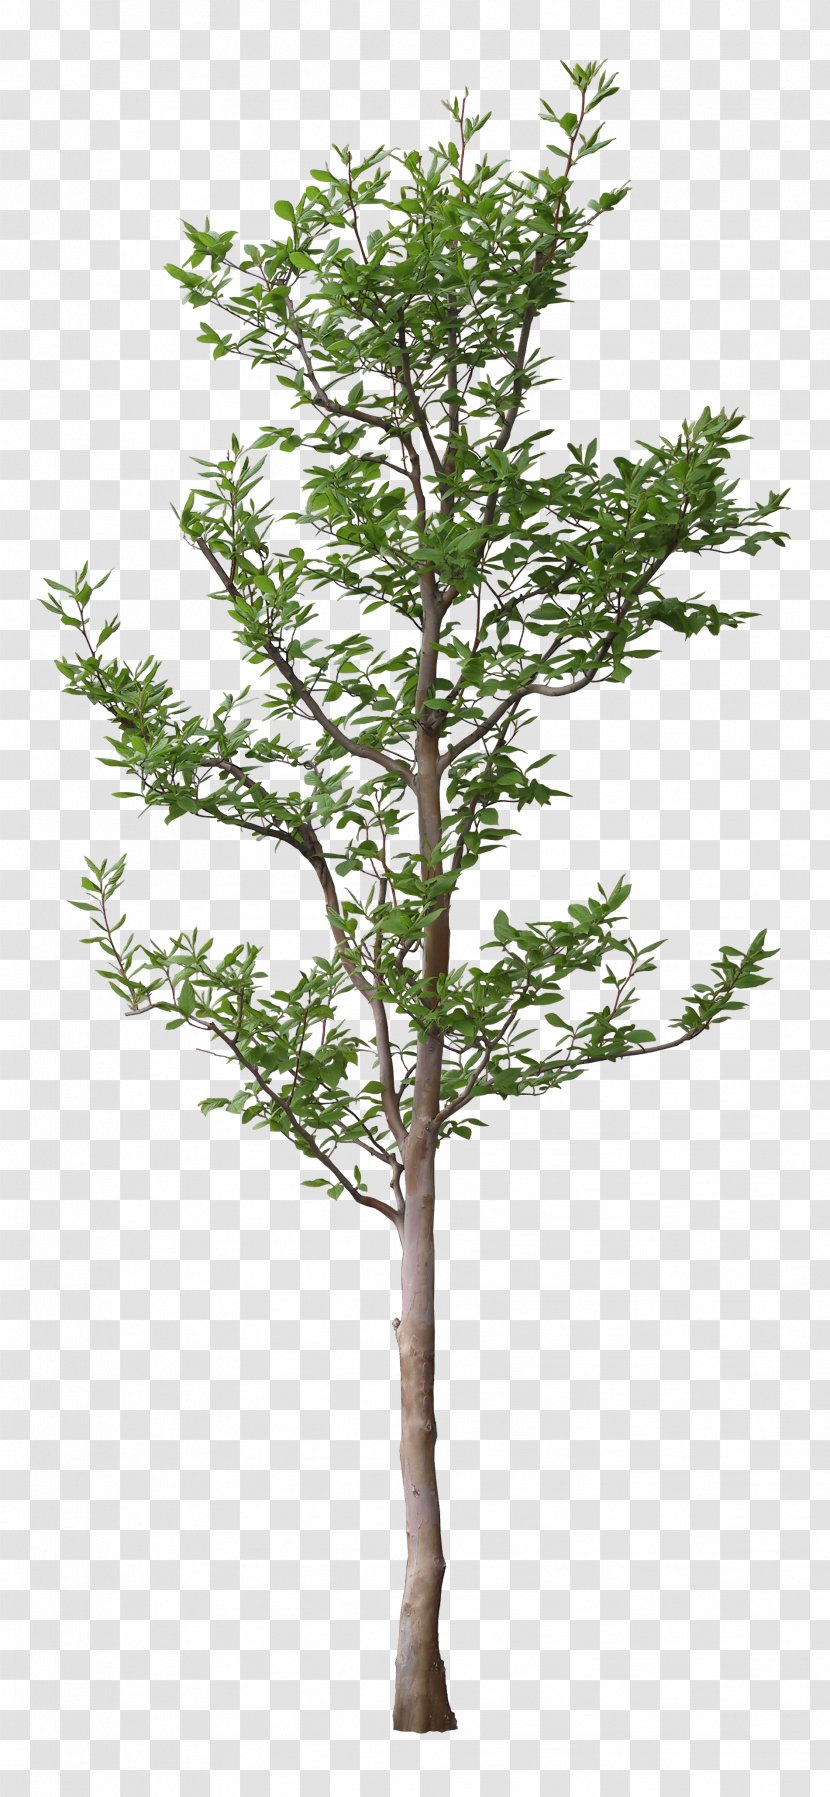 Tree Leaf Branch - Woody Plant - Luxuriant Trees Transparent PNG